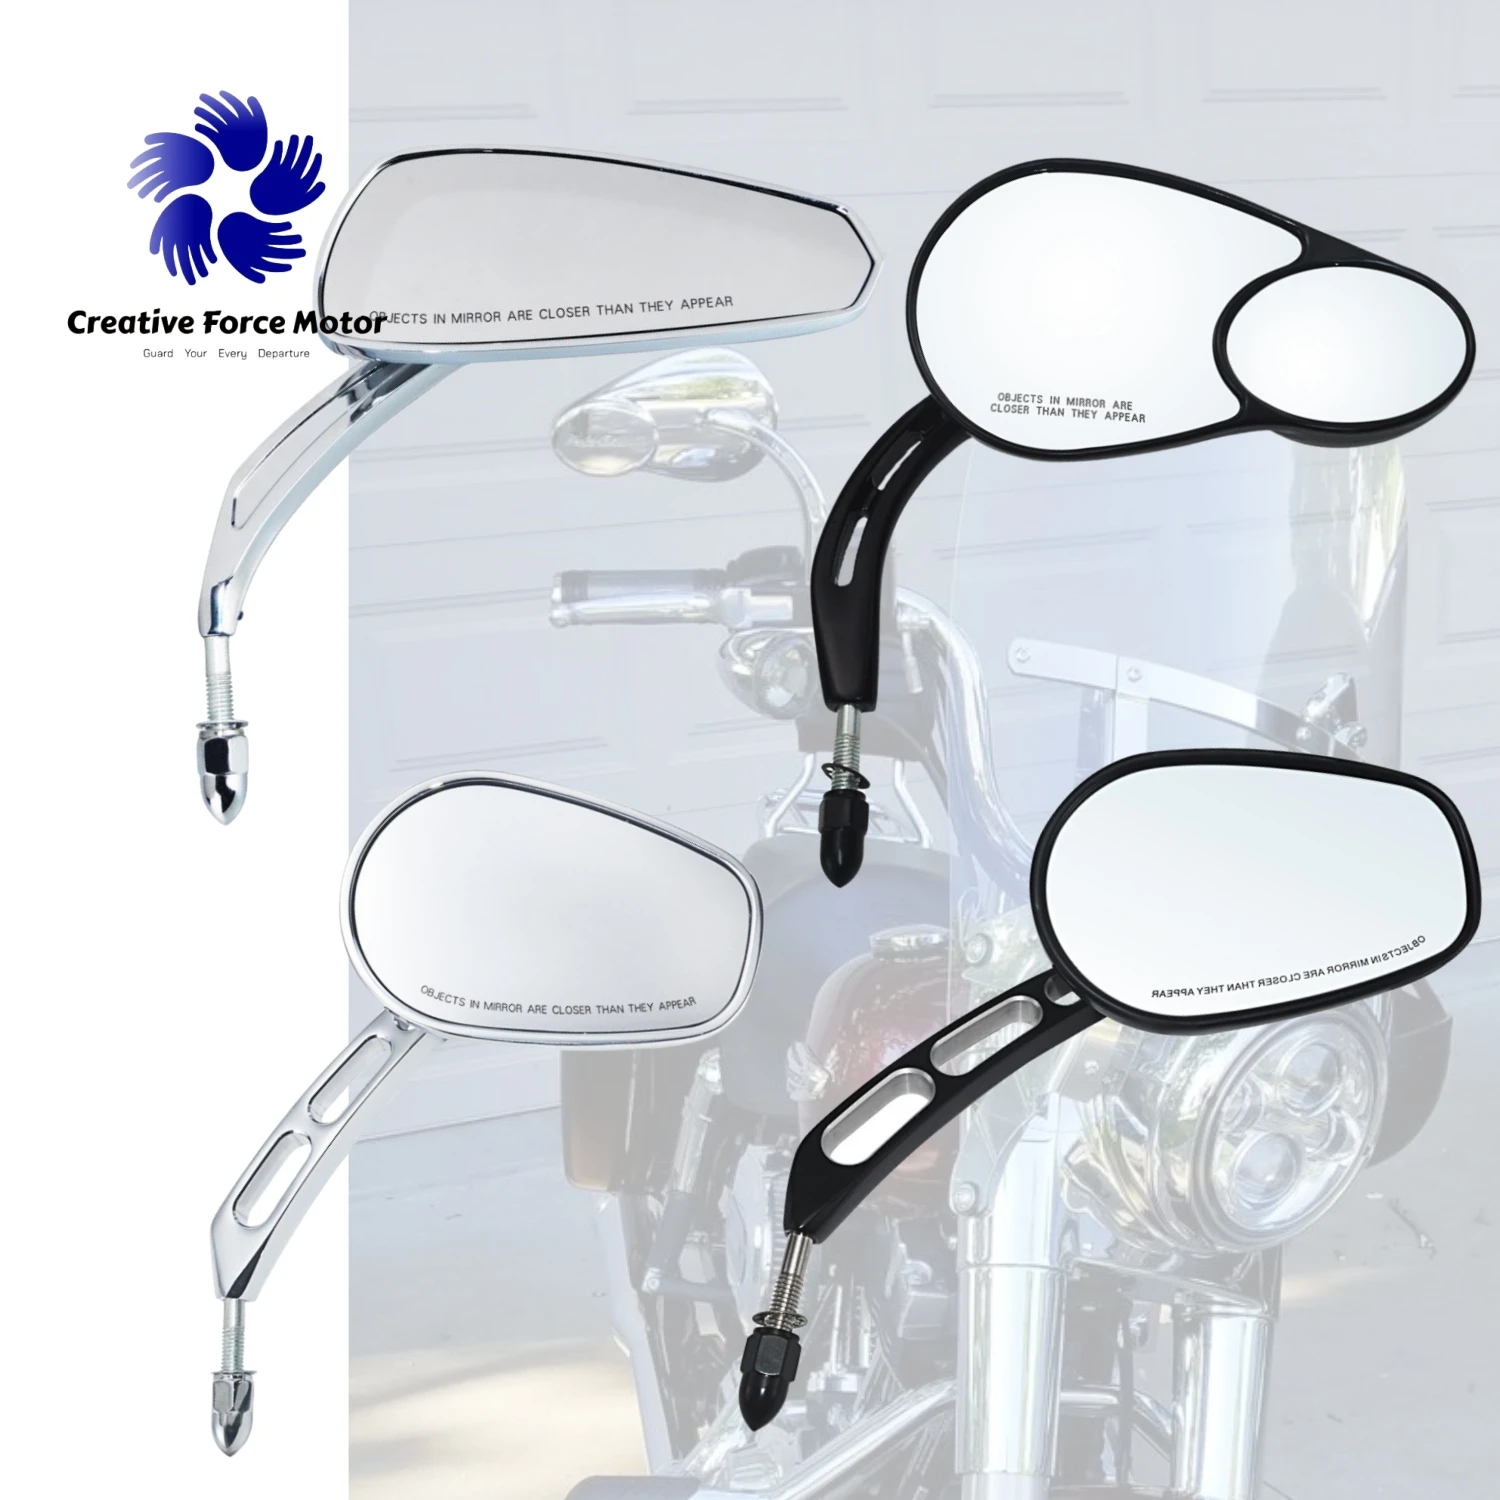 

Motorcycles Rear Side Mirrors Rear view For Harley Honda Road King Touring Sportster Fat Boy Softail Bobber Chopper Street Glide